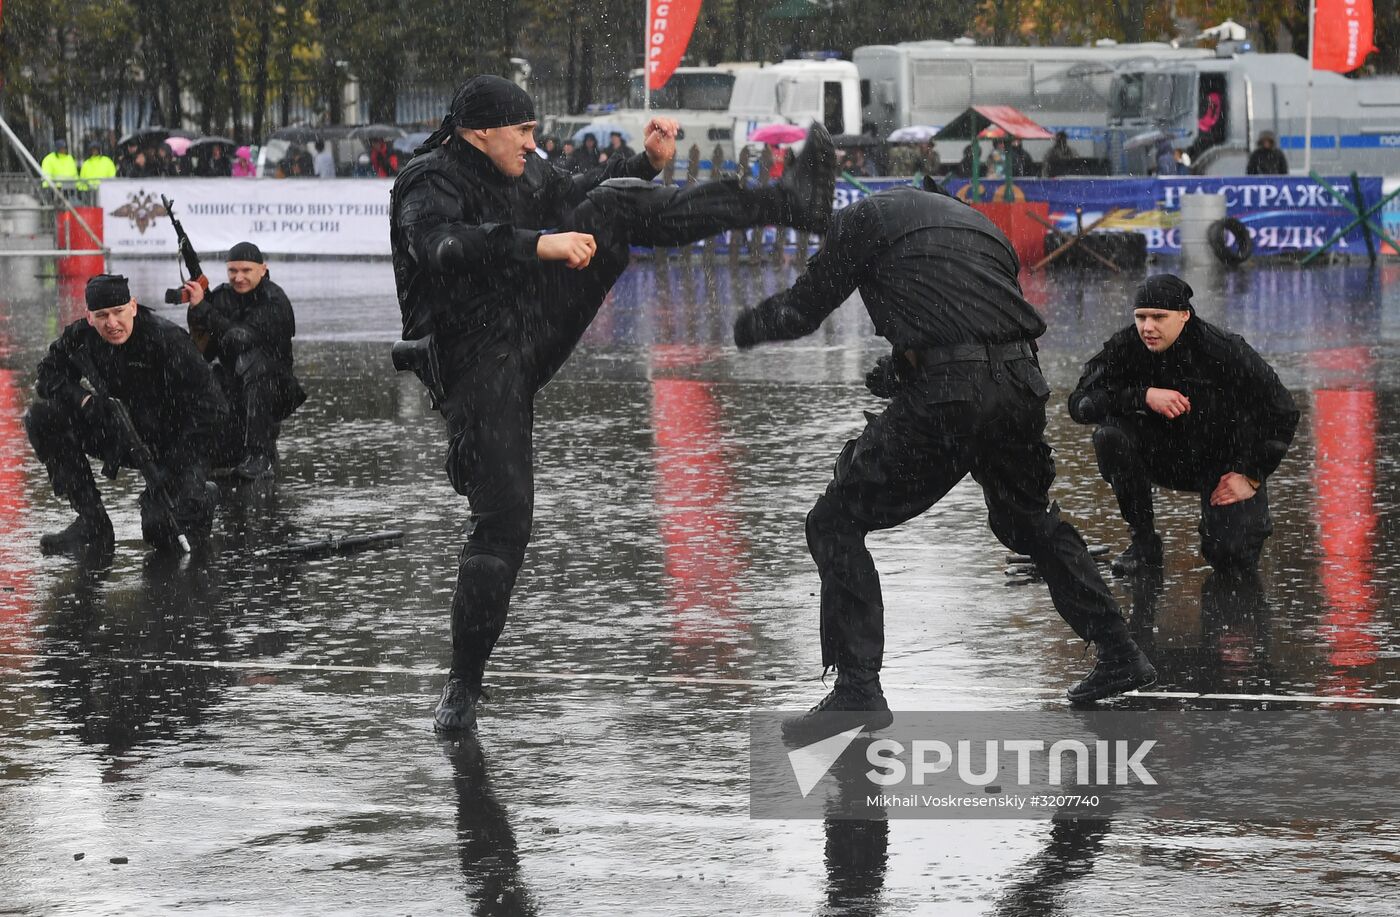 Russian capital's police holds athletic festival